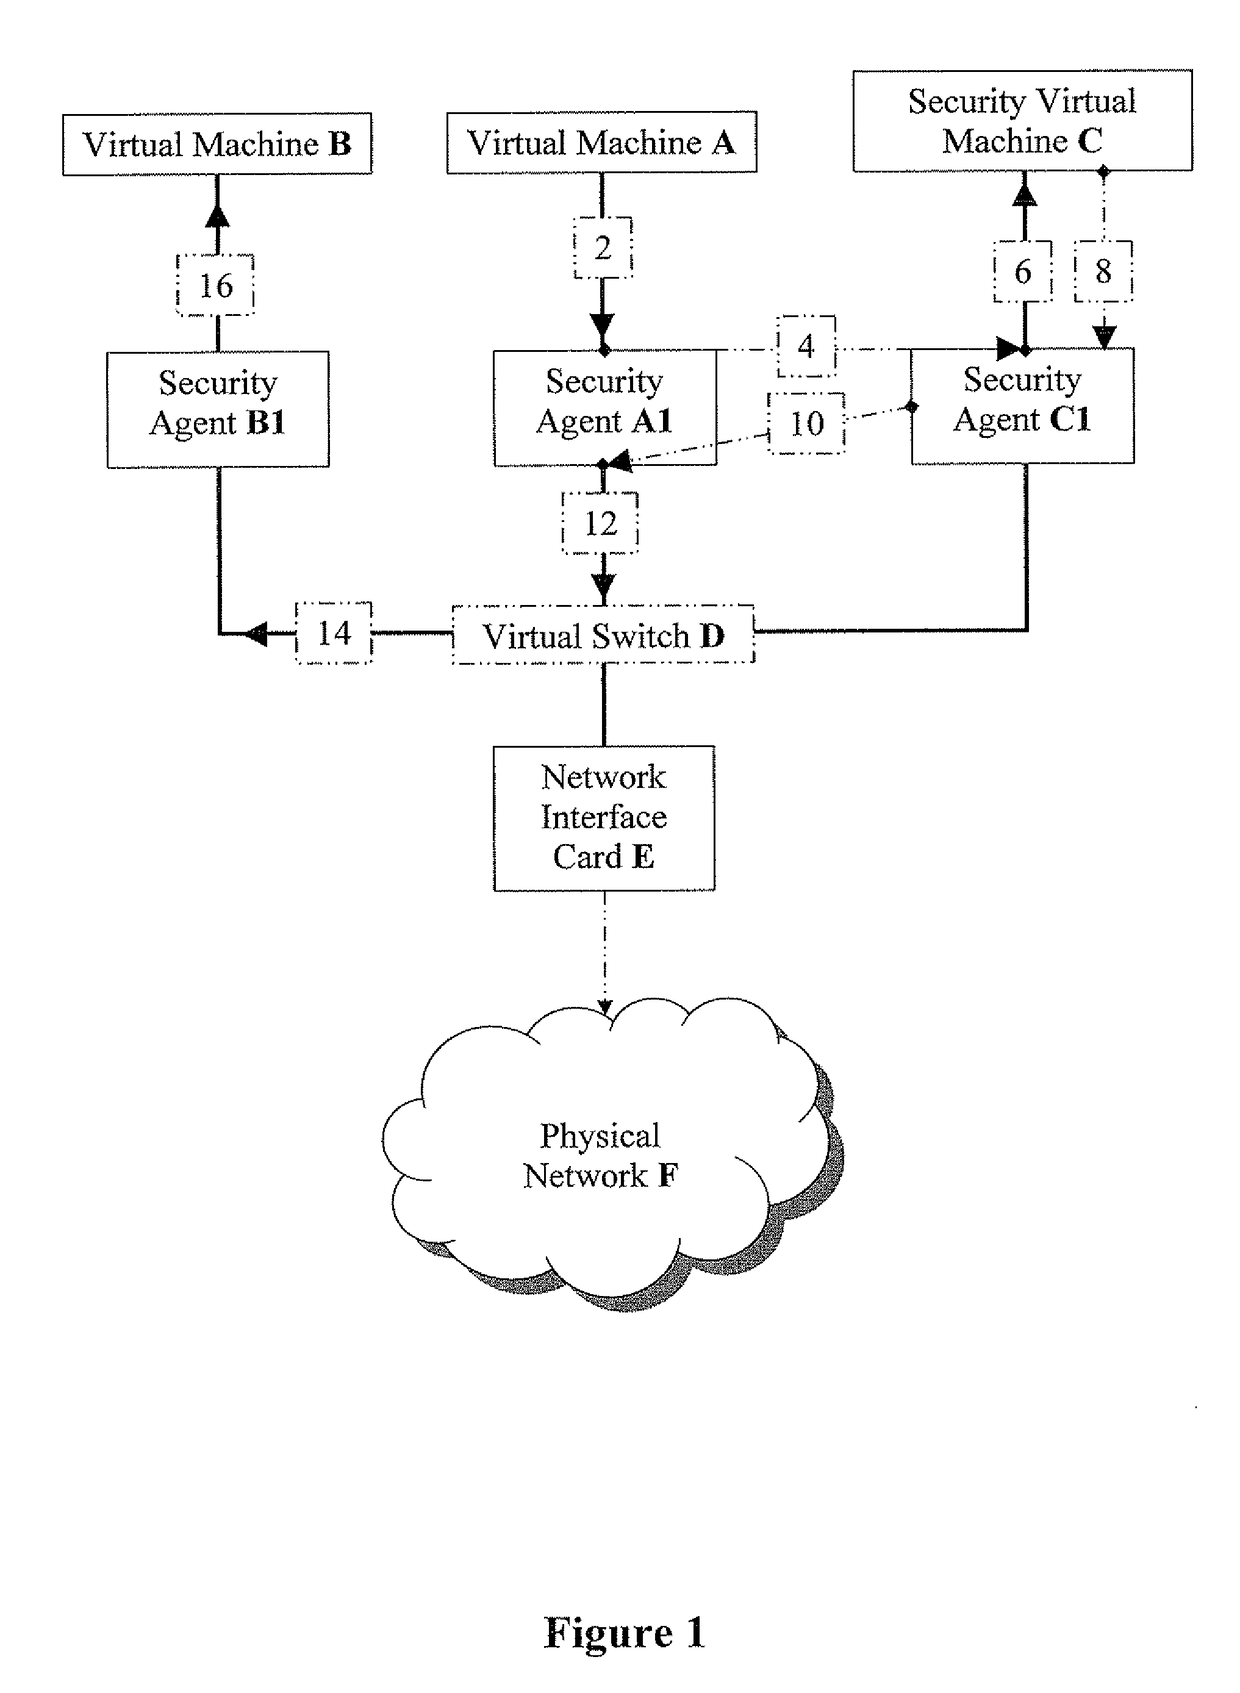 Methods for effective network-security inspection in virtualized environments